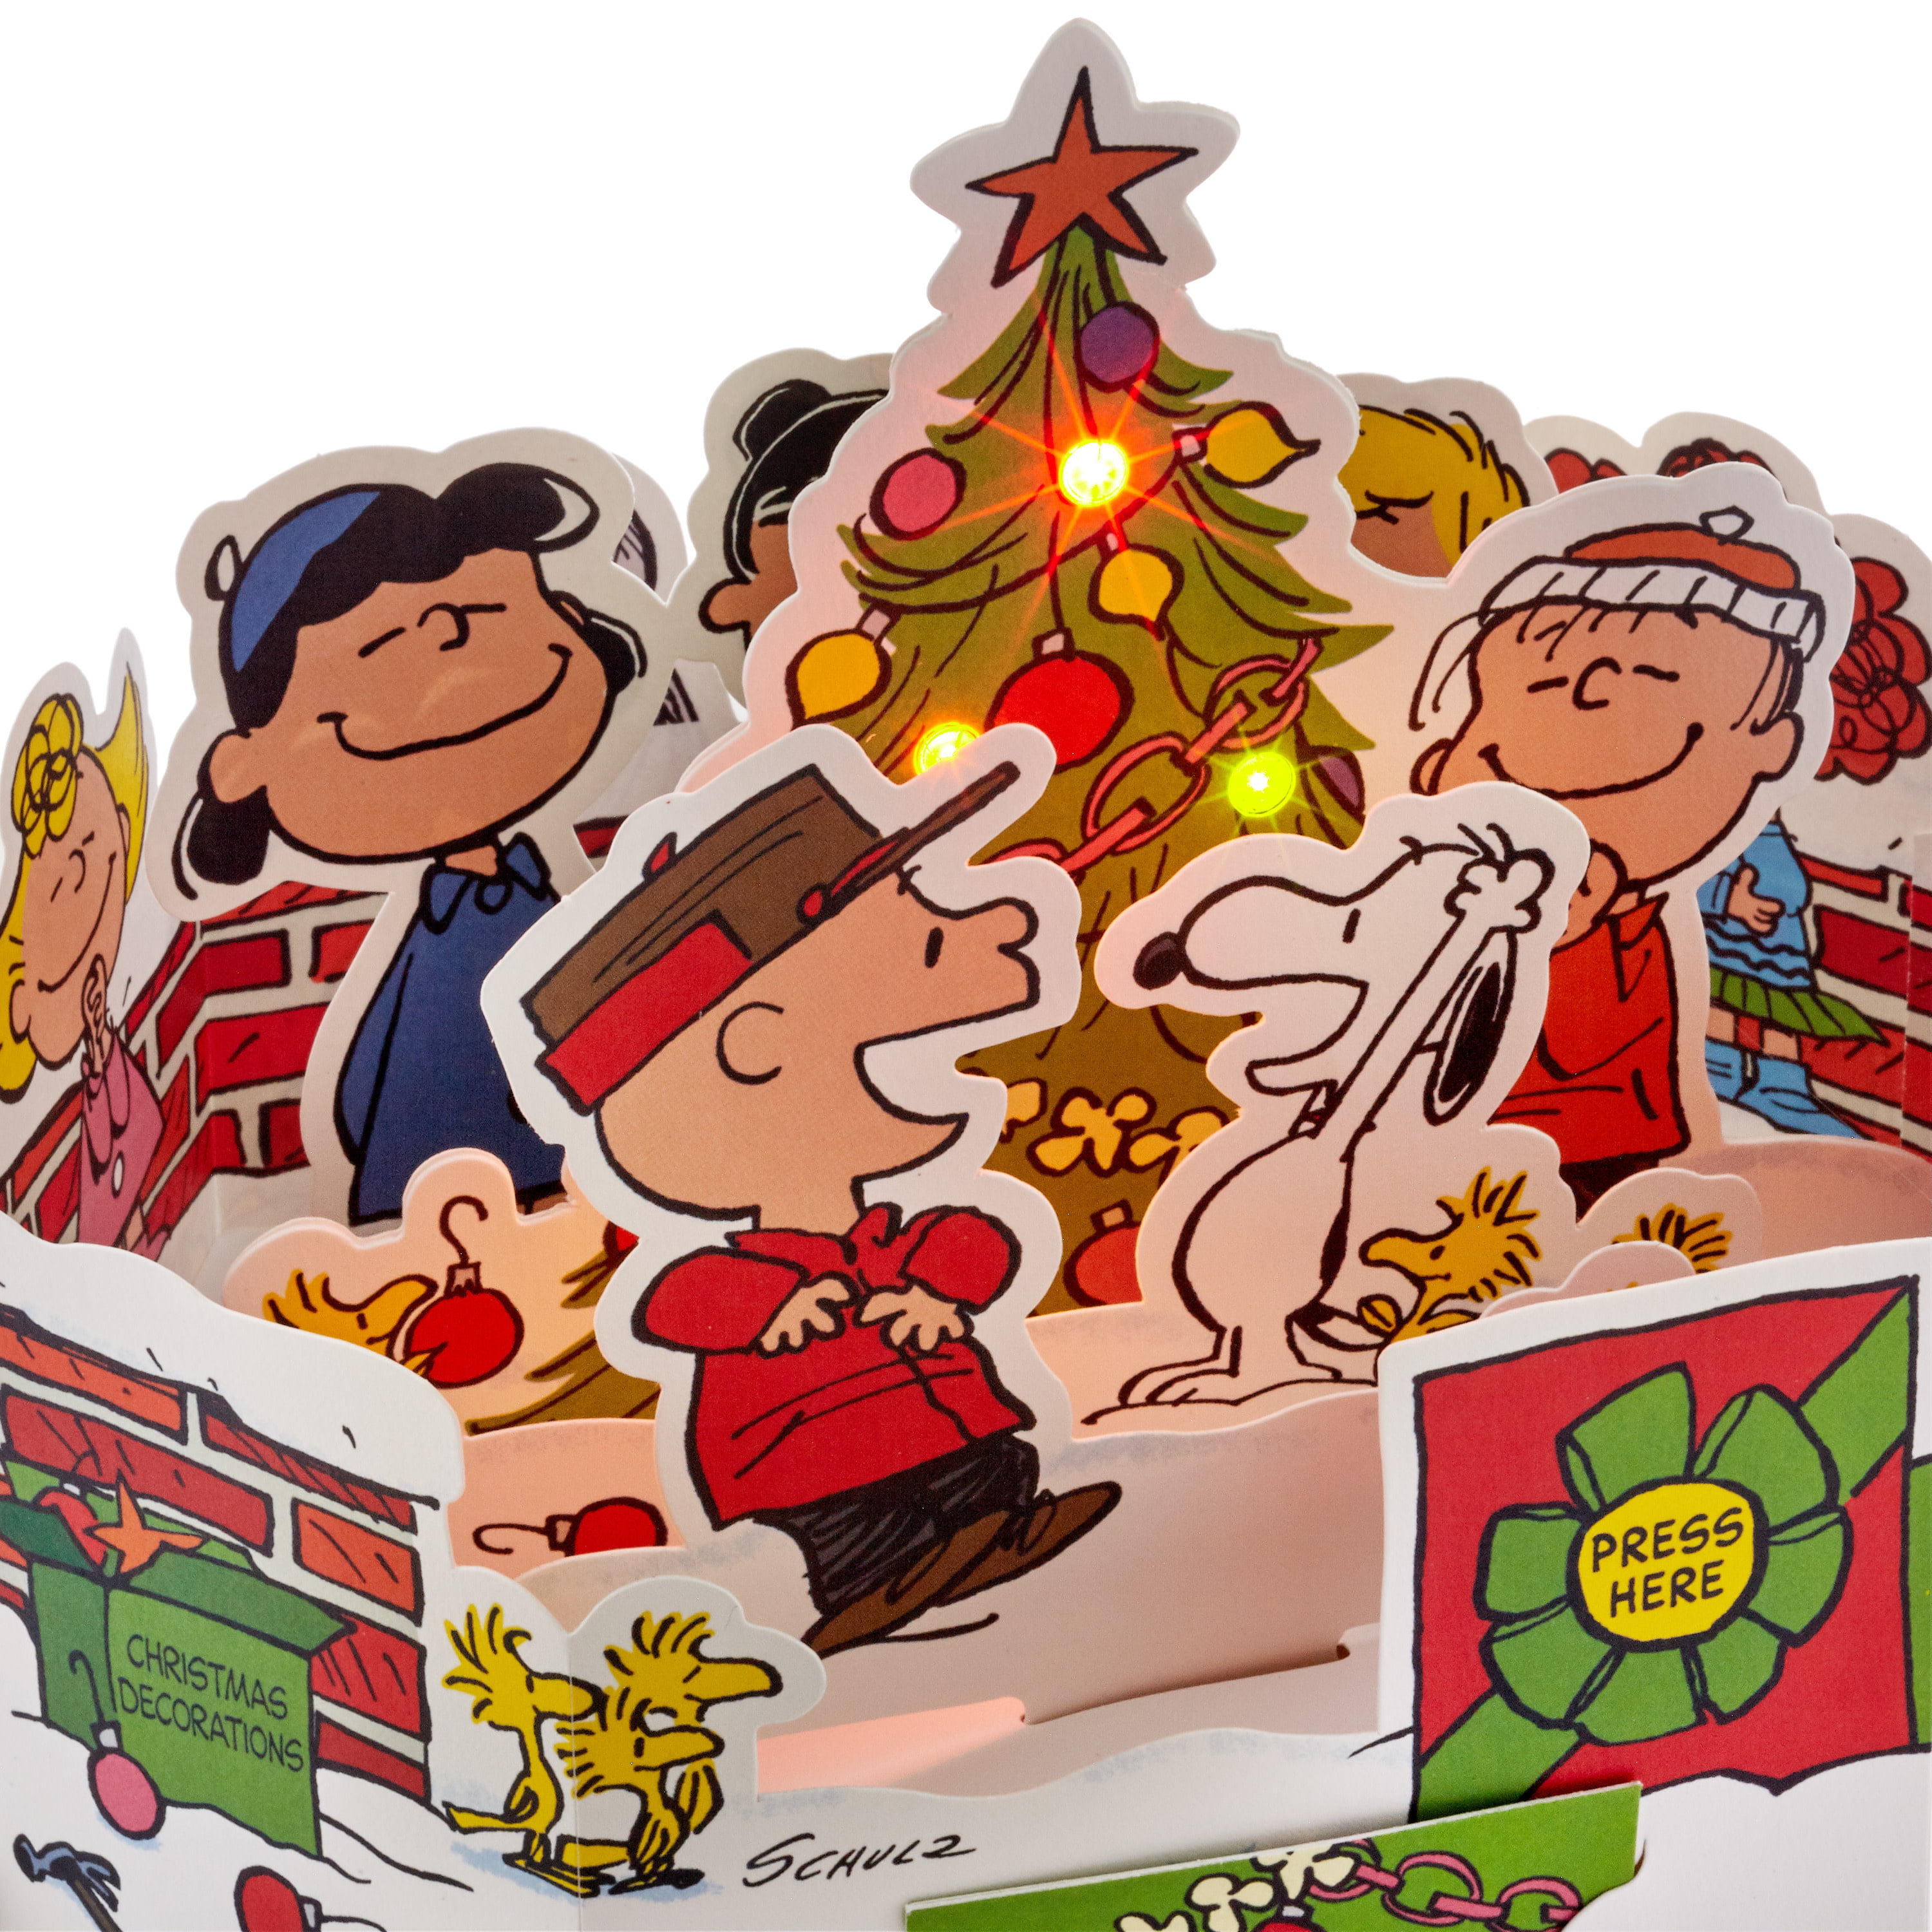 Charlie Brown Christmas Tree, Plays Christmastime is Here Hallmark Paper Wonder Peanuts Displayable Pop Up Christmas Card with Light and Sound